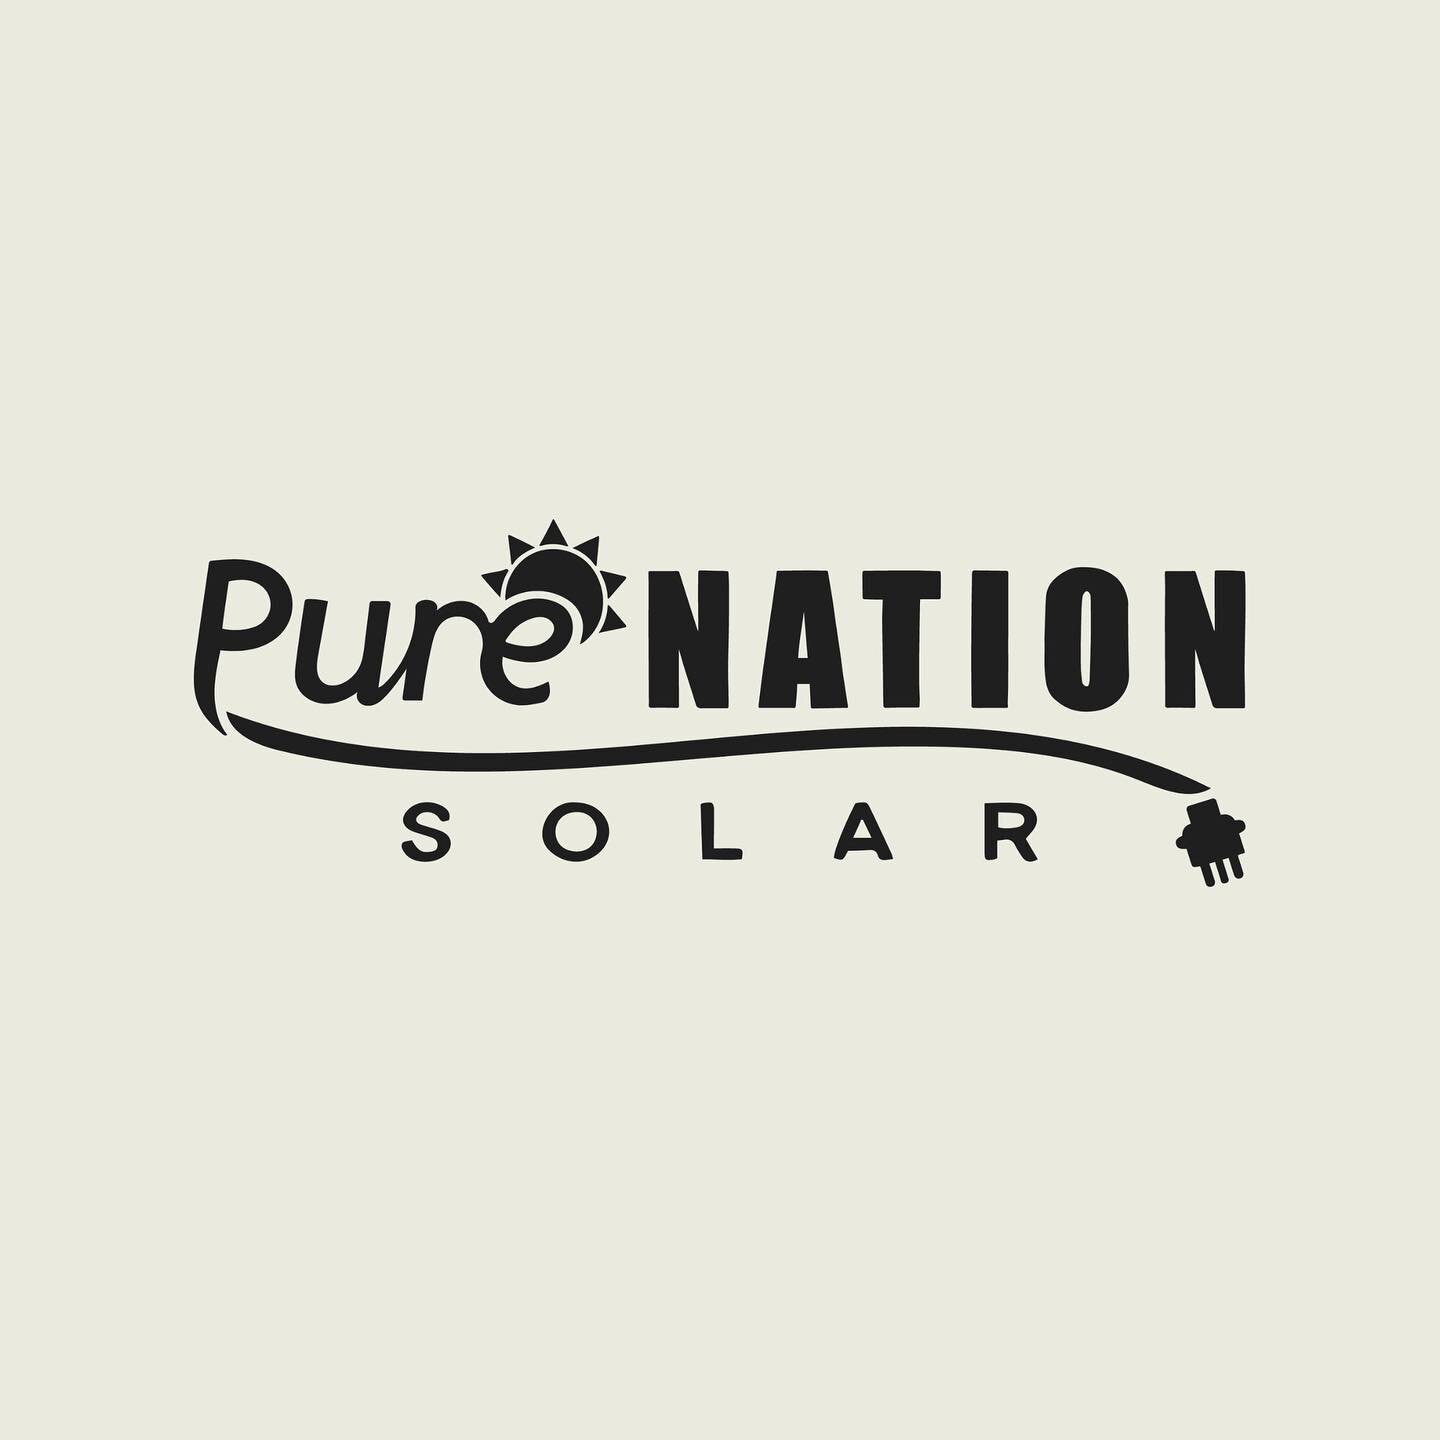 A new Logo Concept &amp; Design we created for PURE NATION SOLAR ☀️ Specialising in all residential and commercial solar projects. 
.
.
.
.
.
.
.
.
#krispconcepts #krispcreative #purenationsolar #solaraustralia  #solarpanels #solarinstallation #solar